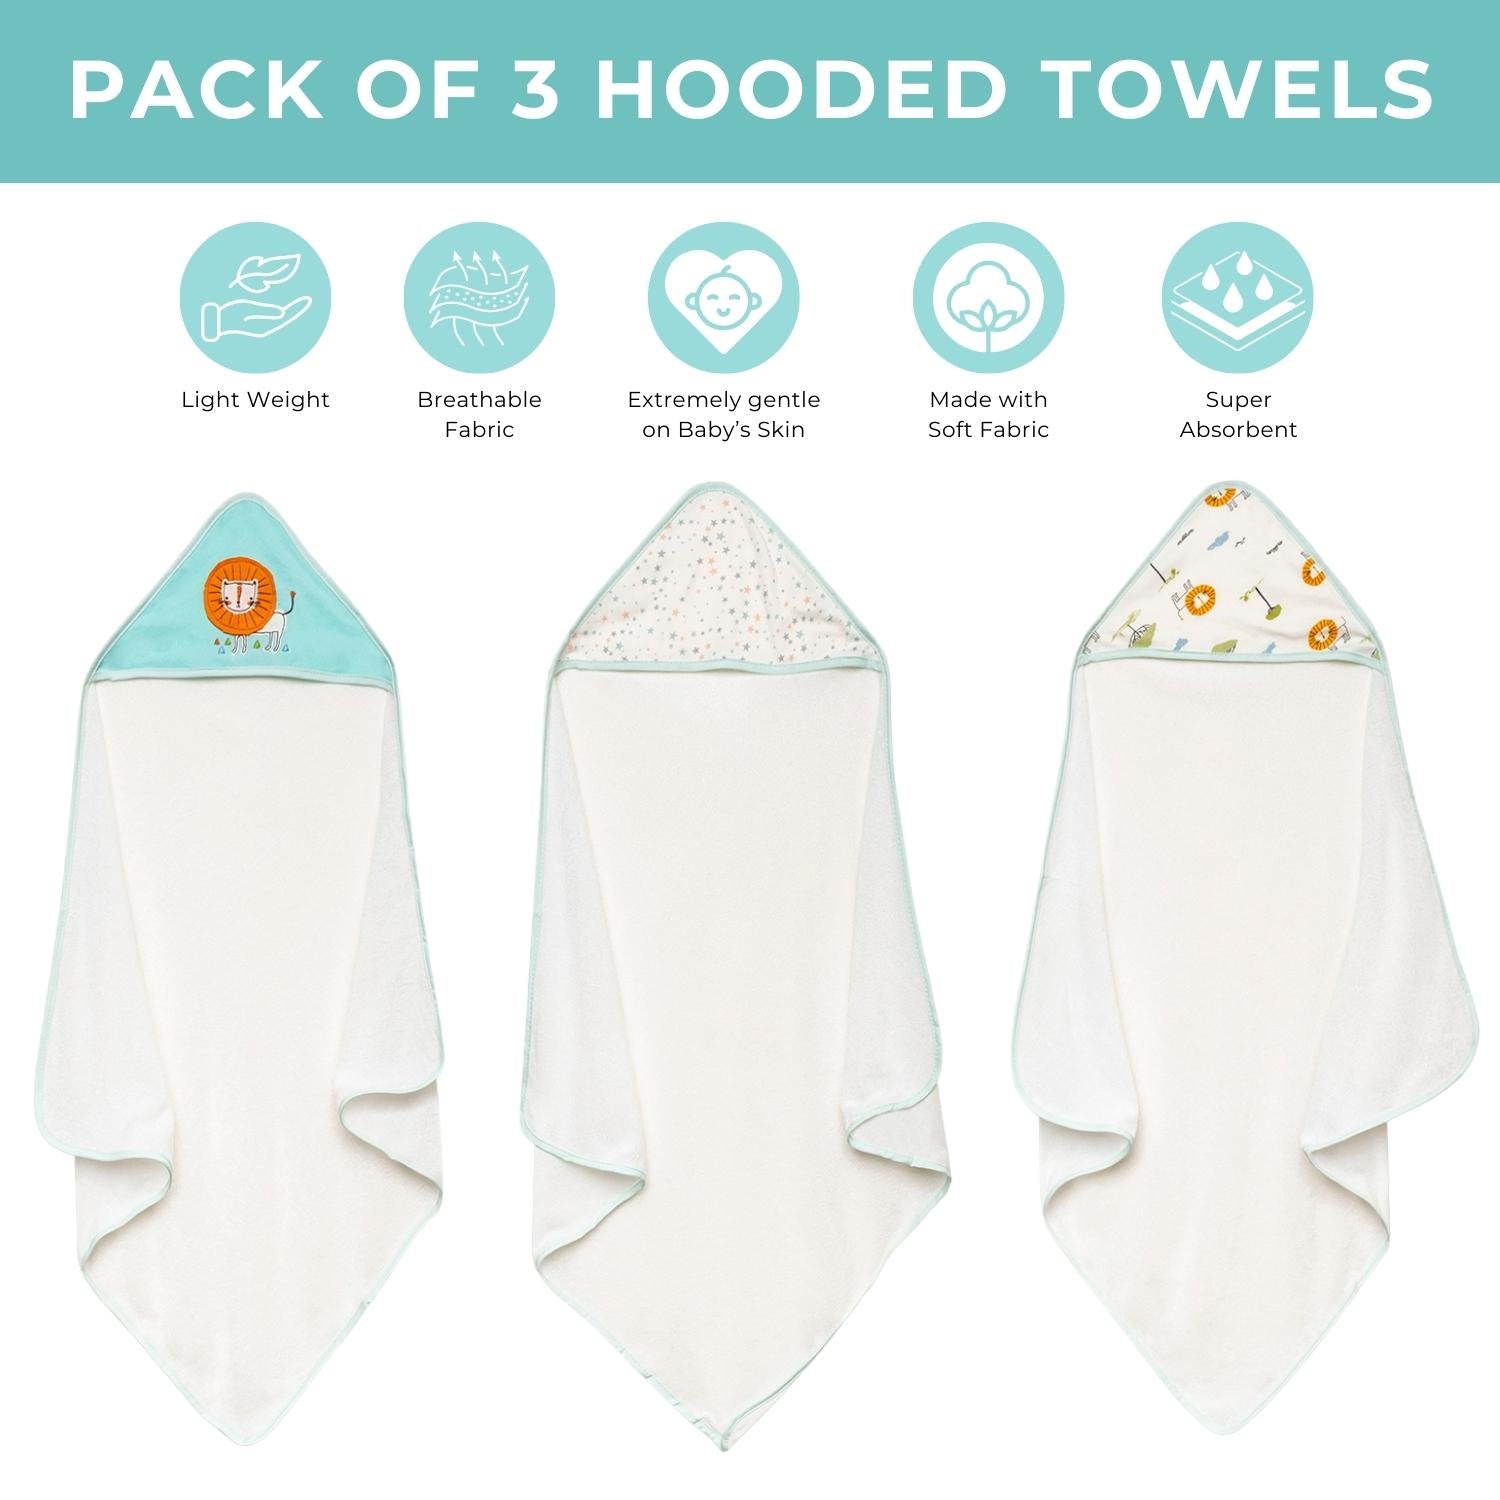 Baby Moo Lion And Star Supersoft Highly Absorbent Durable Hooded Towel Set - Turquoise